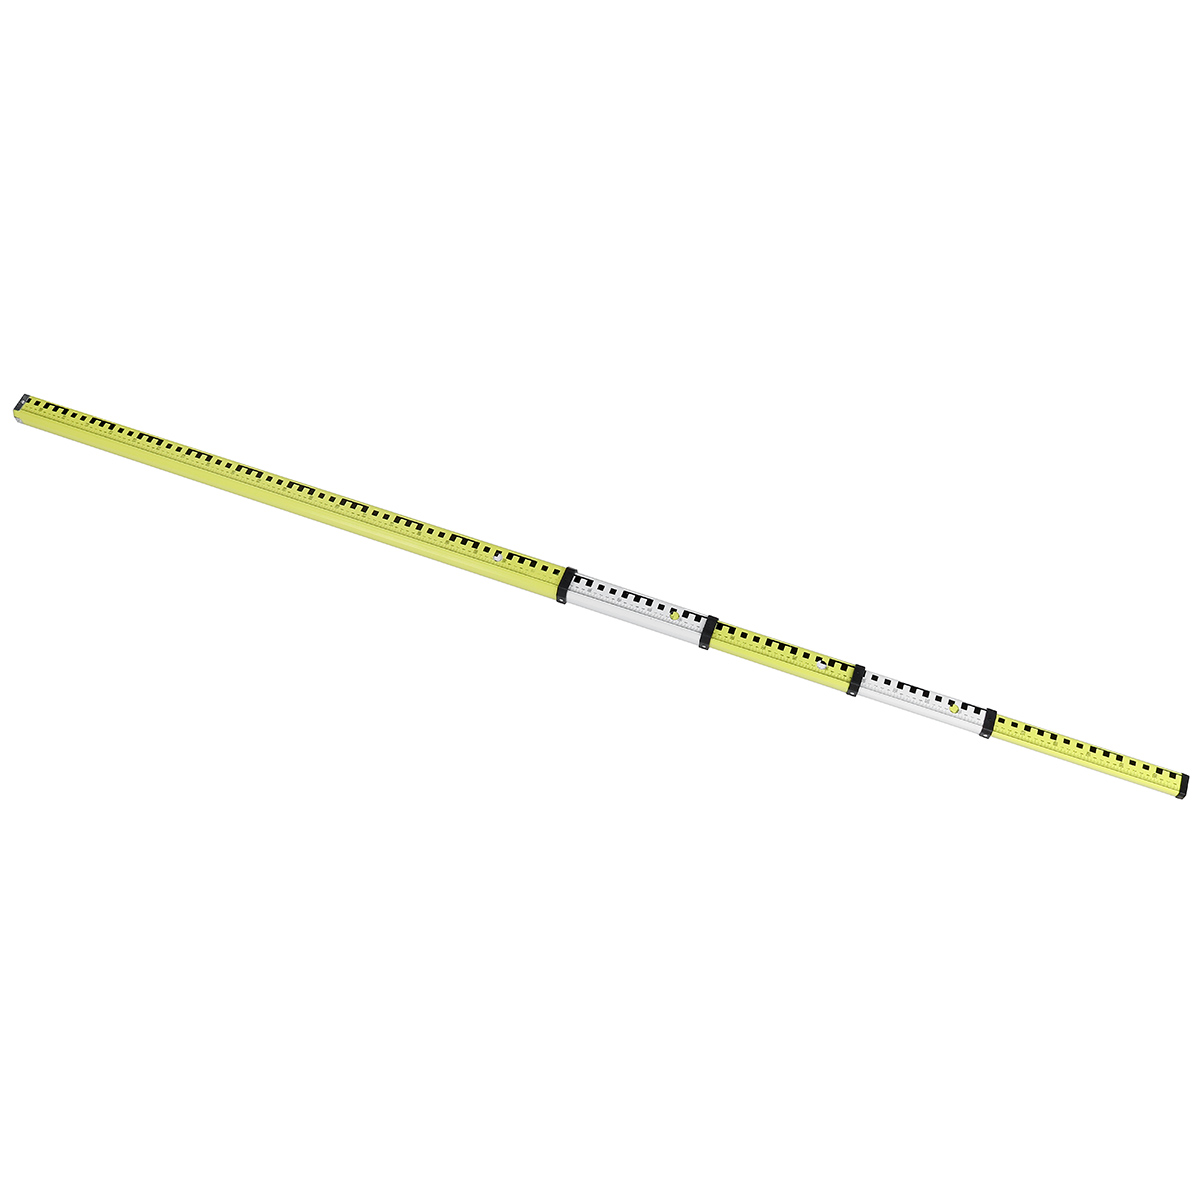 Thickened-Aluminum-Alloy-3-Meters-5-Meters-7-Meters-Tower-Ruler-Ruler-Measuring-Tool-Thickened-Fixed-1895358-4